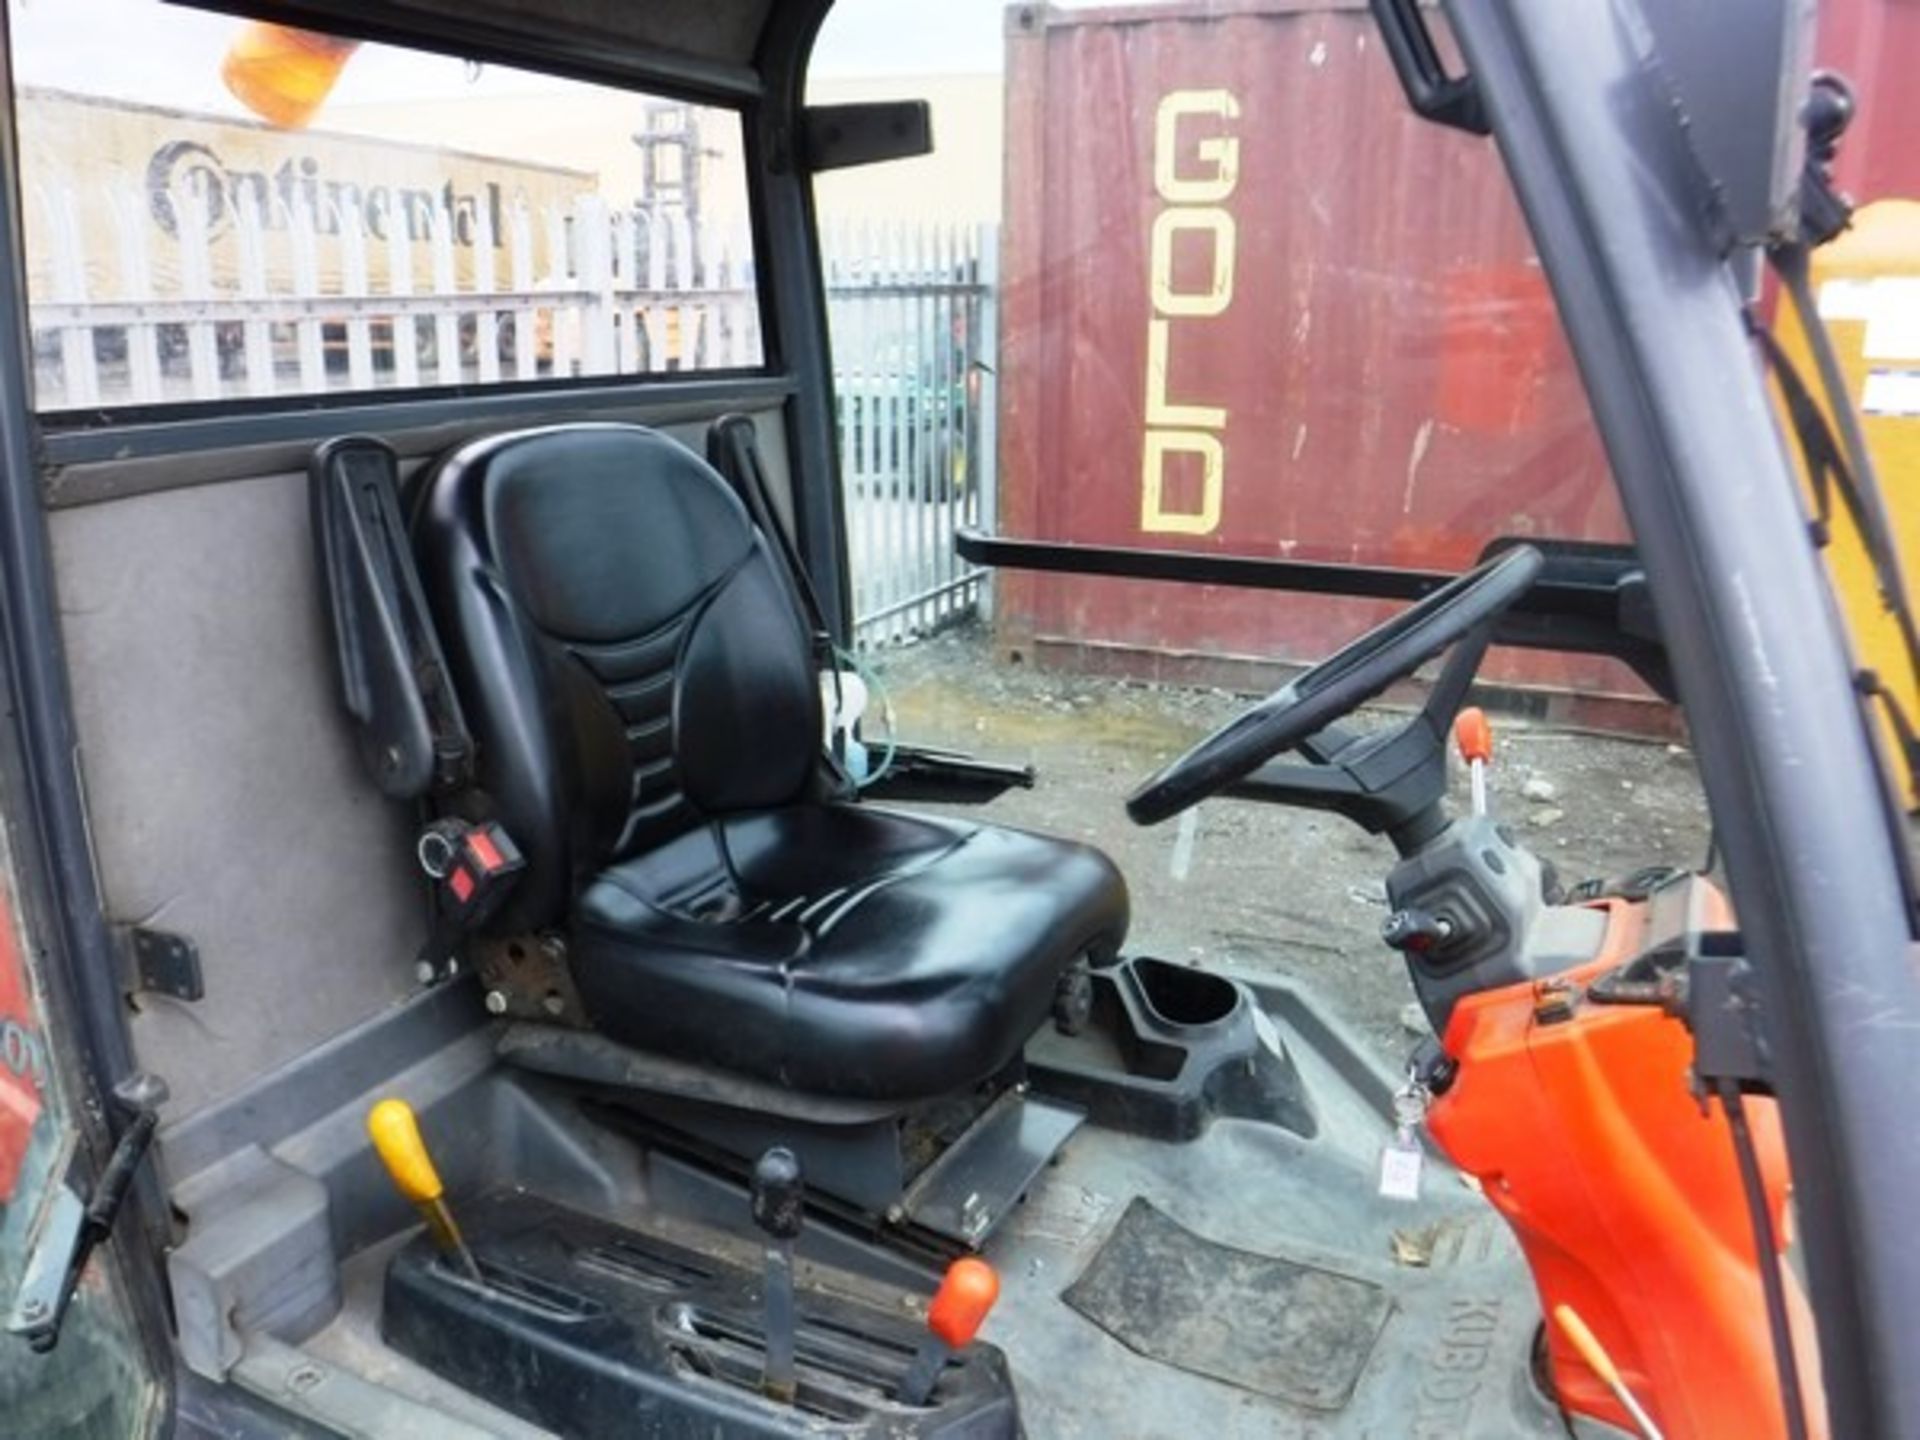 2012 KUBOTA 3680FC. Reg No SP12 AHL c/w flaildeck 155 out front mower. 1545hrs (not verified). This - Image 11 of 12